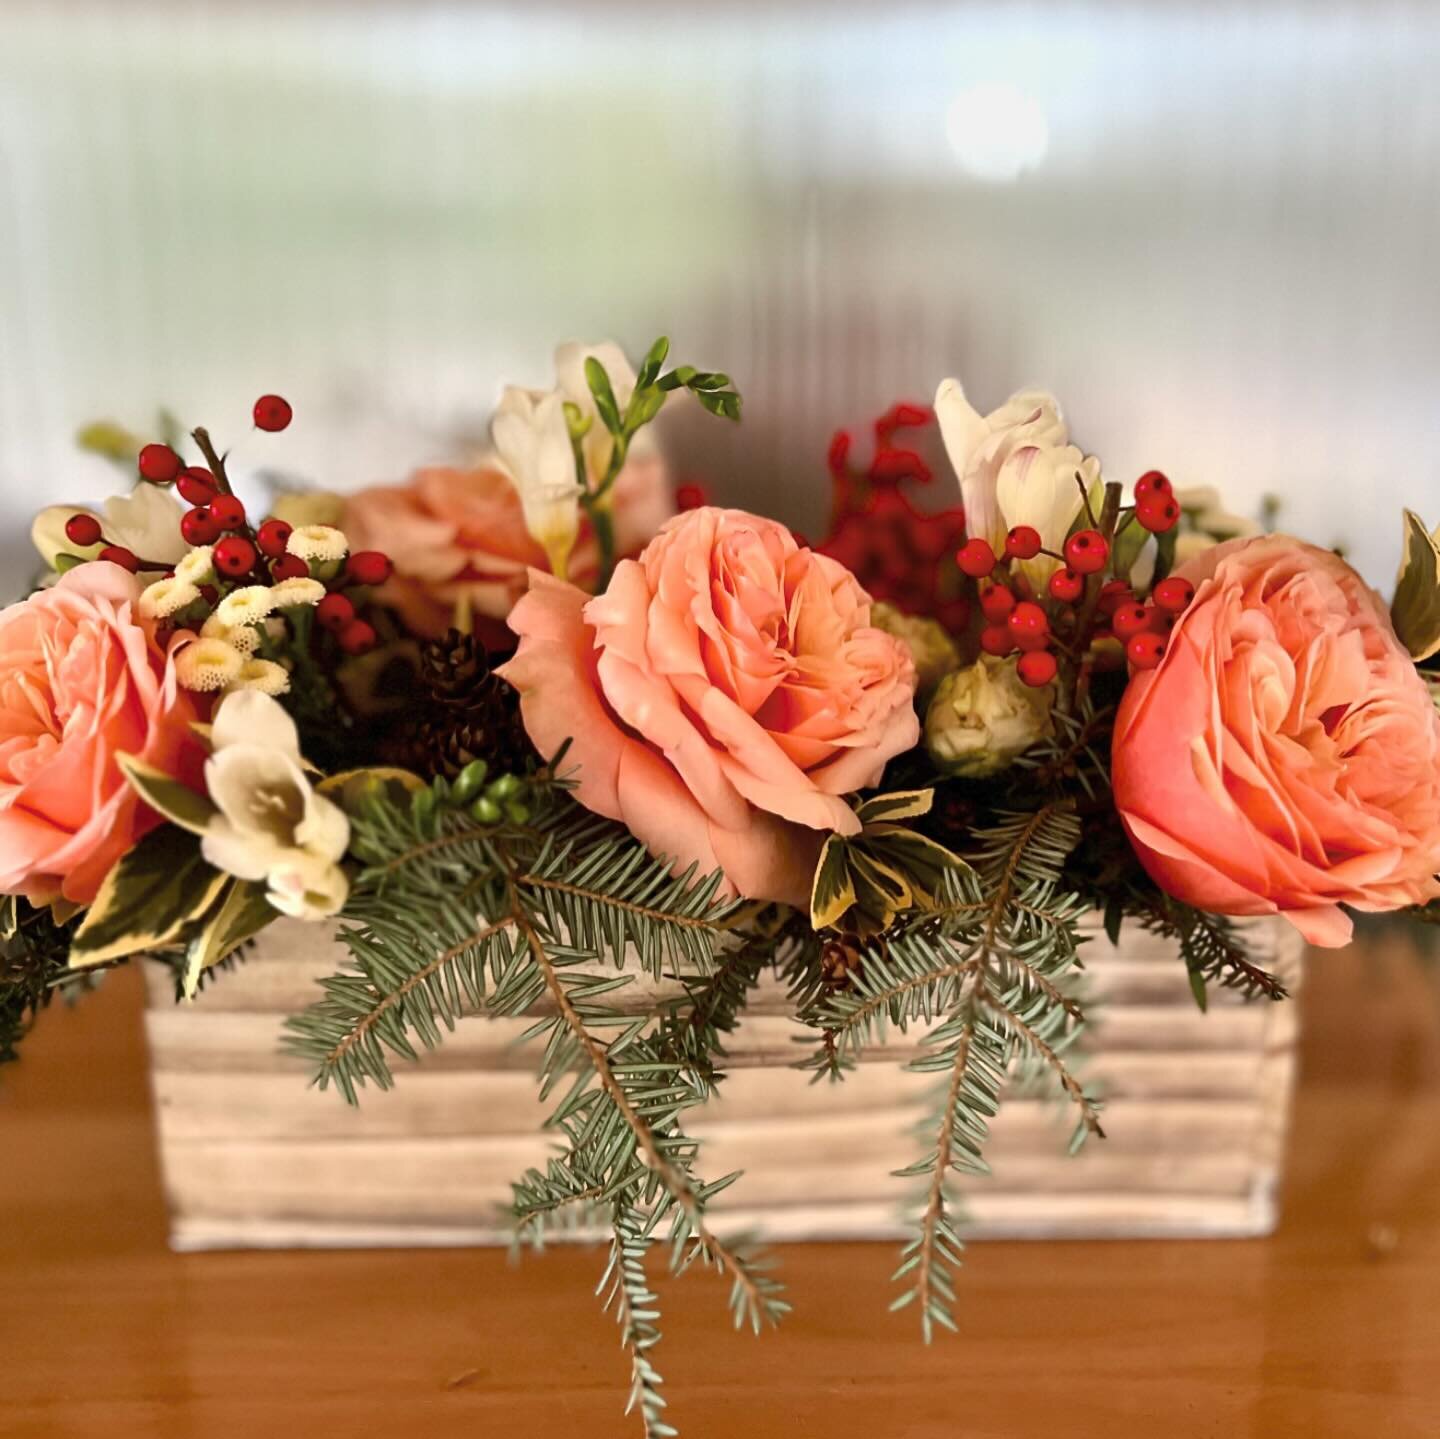 Was feeling stuck in a creative rut this week (I really think it&rsquo;s the weather), so I put together some arrangements. They&rsquo;re not my flowers (Thanks @traderjoes), but the greenery is all @brookfield.blooms.

Wishing everyone a wonderful e